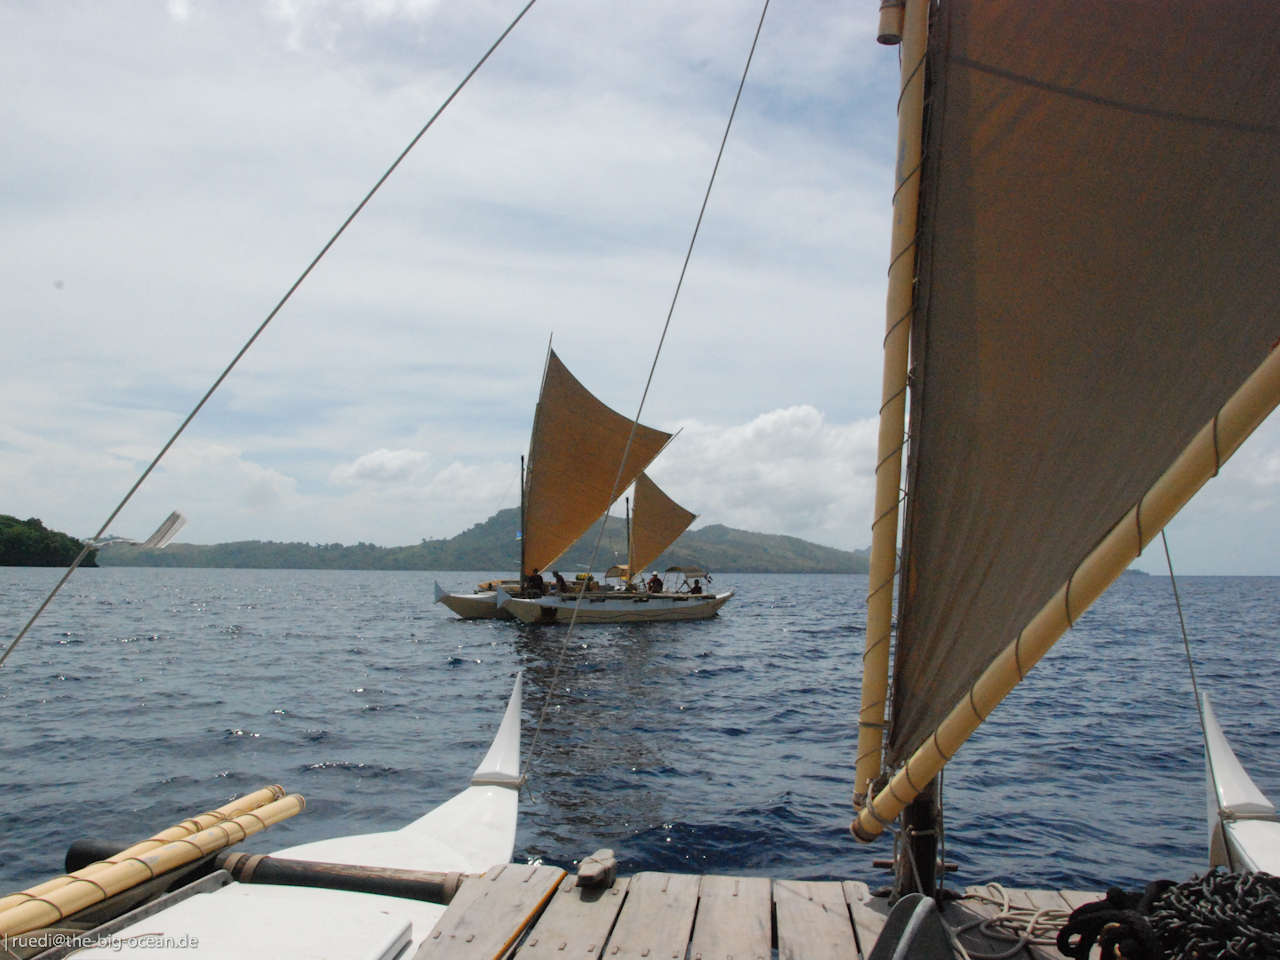 The expedition boats under sail